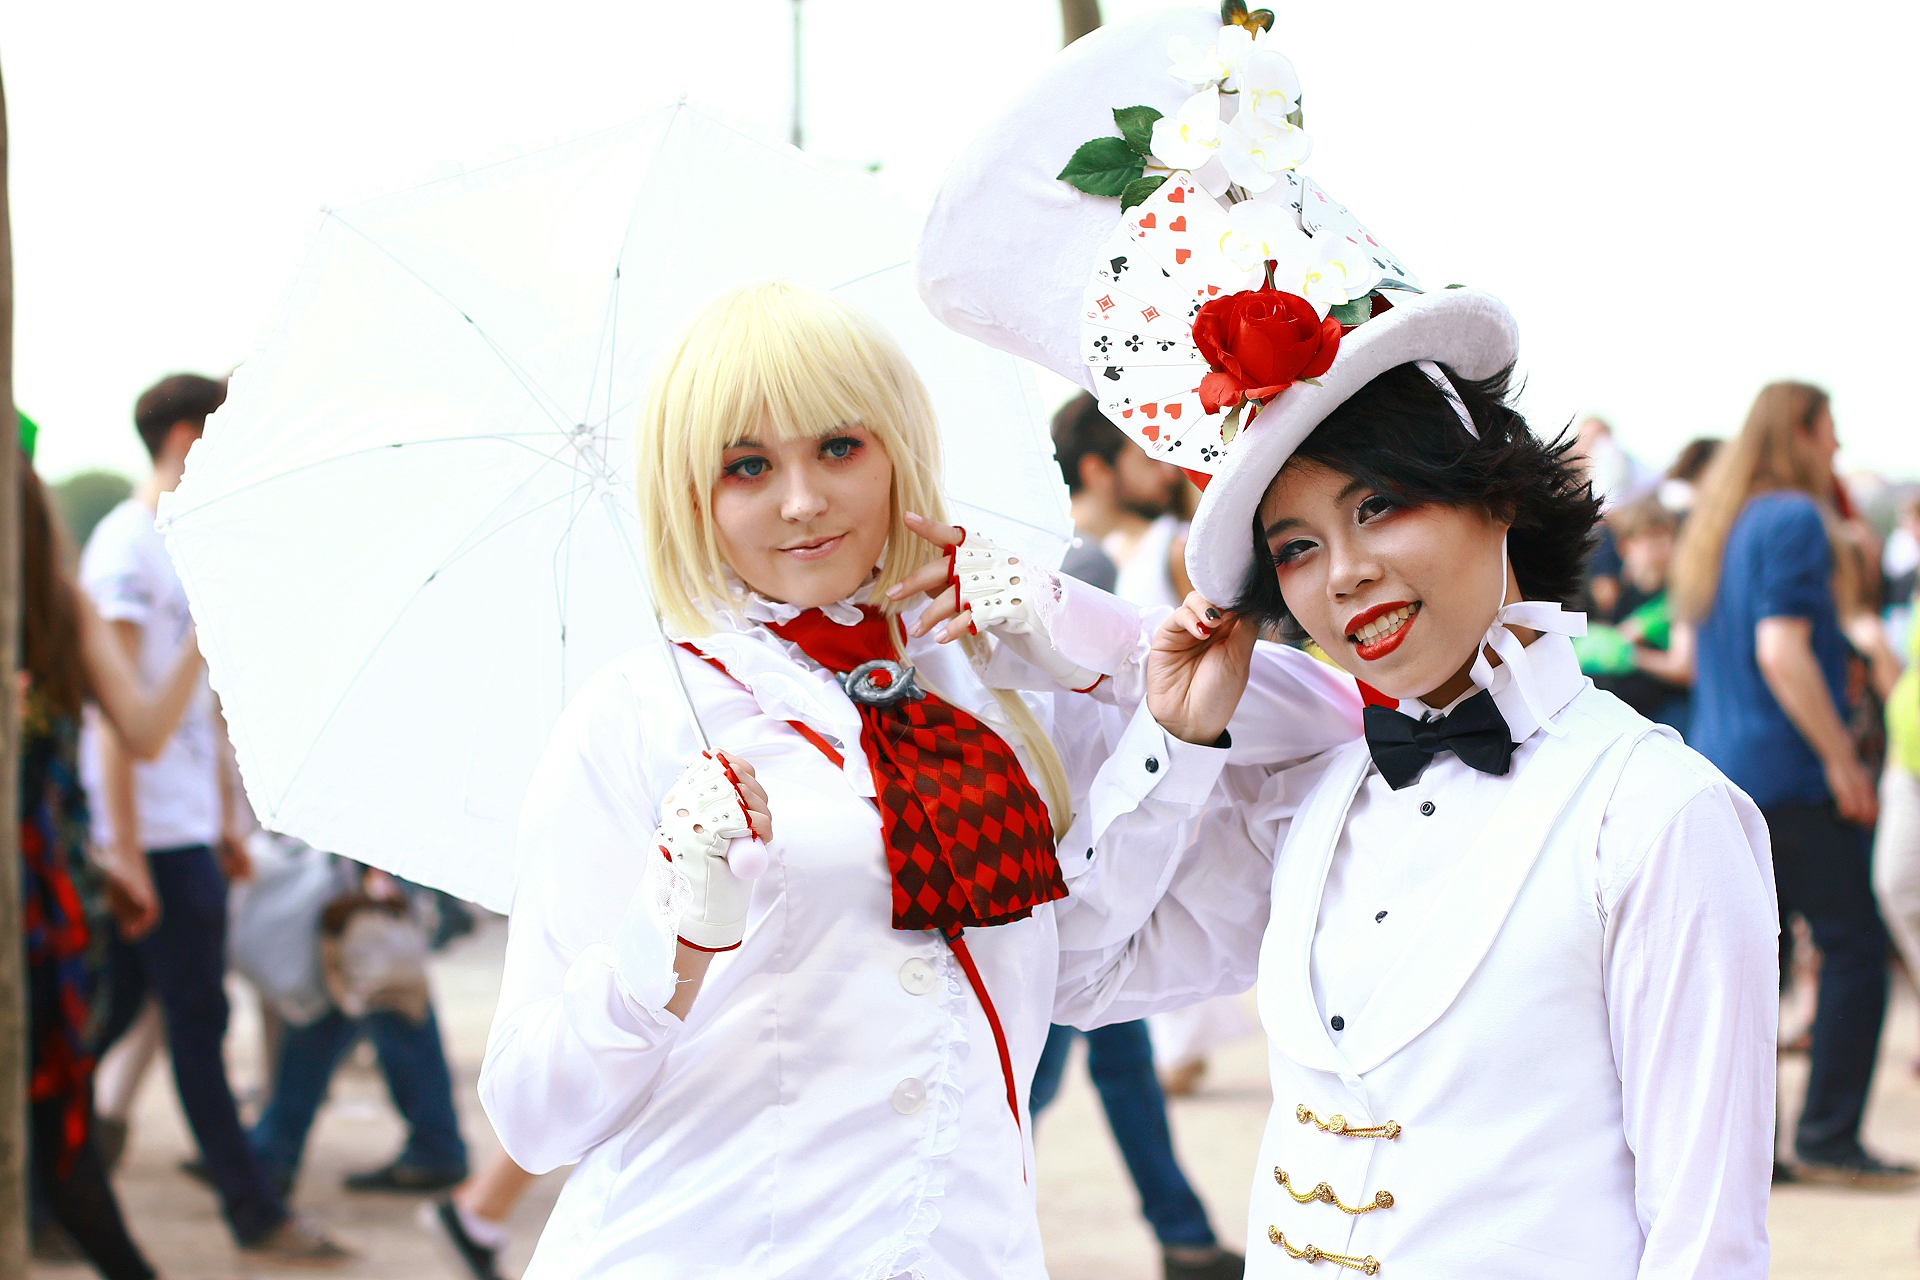 JAPAN DAY 2016 – COSPLAY, POSING AND PHOTOGRAPHERS